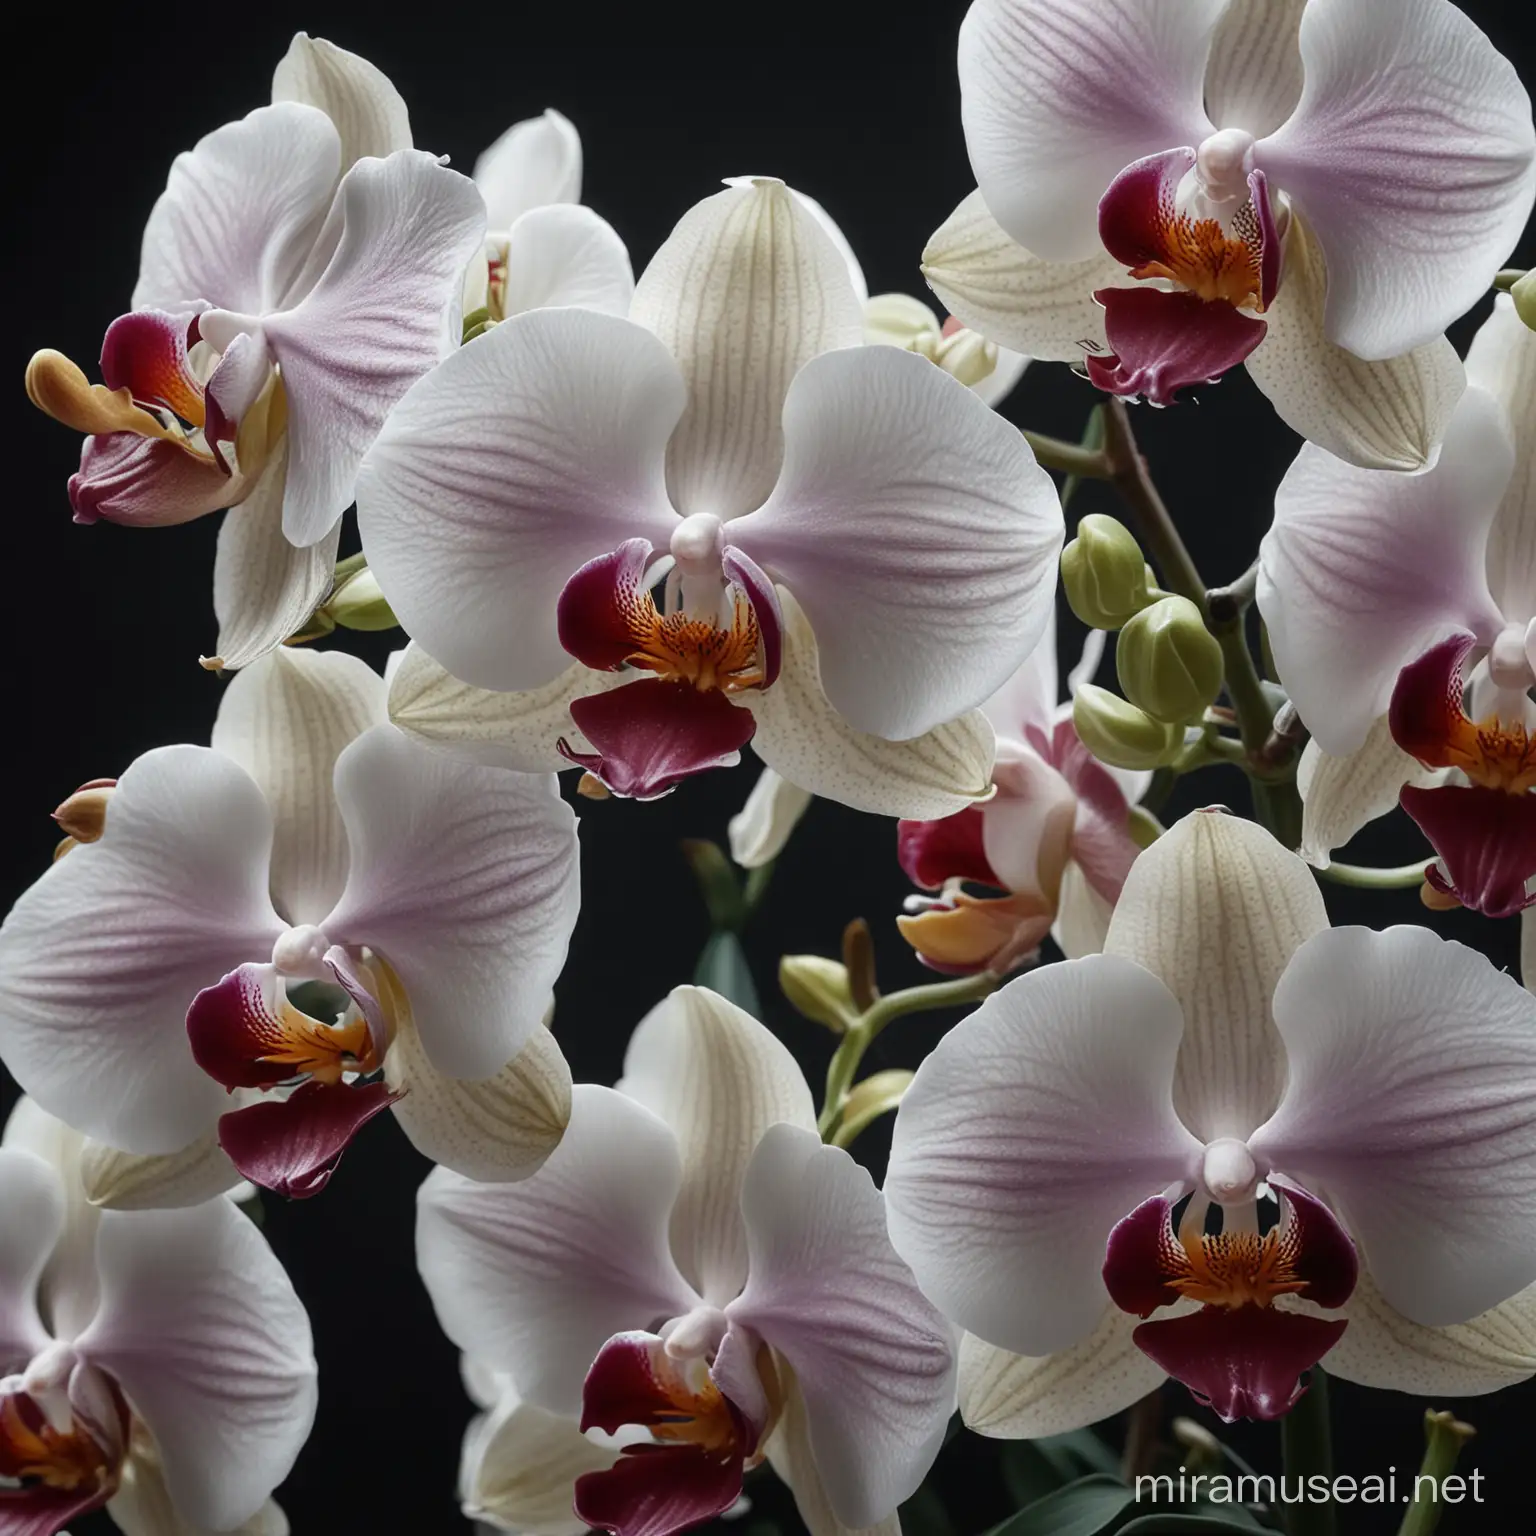 Orchids very close together. Dramatic atmosphere. Dark background. High resolution. Hyperrealism